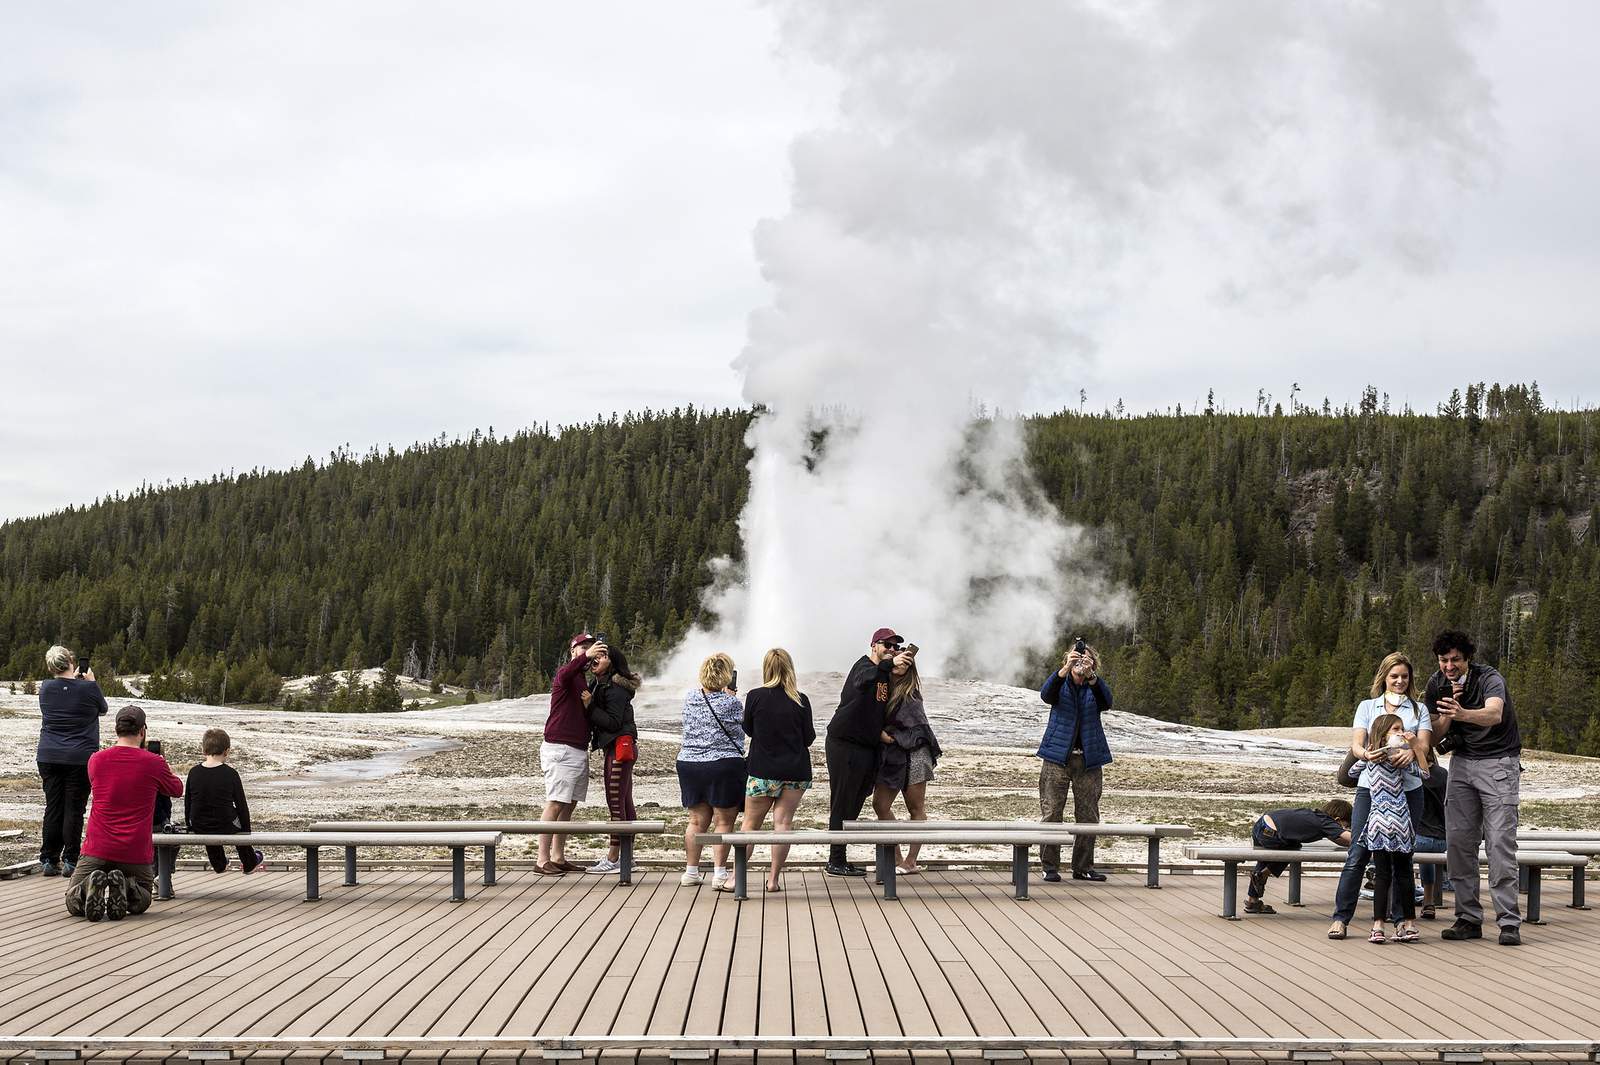 National parks hope visitors comply with virus measures